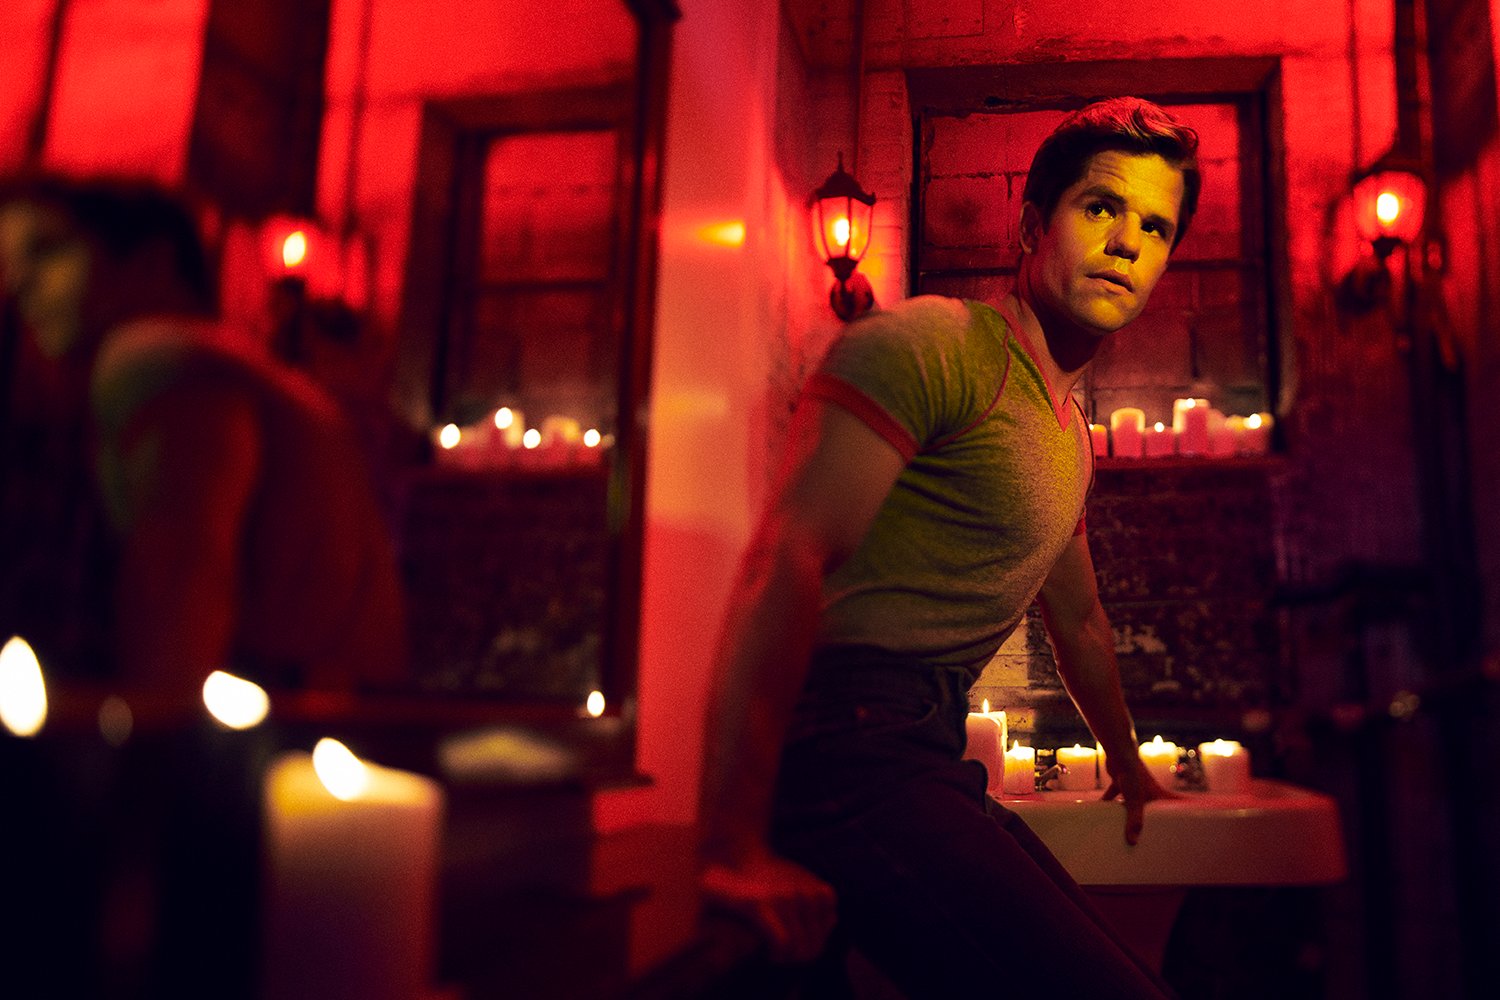 Charlie Carver as Adam, sitting on the floor of a red candlelit room in American Horror Story: NYC.